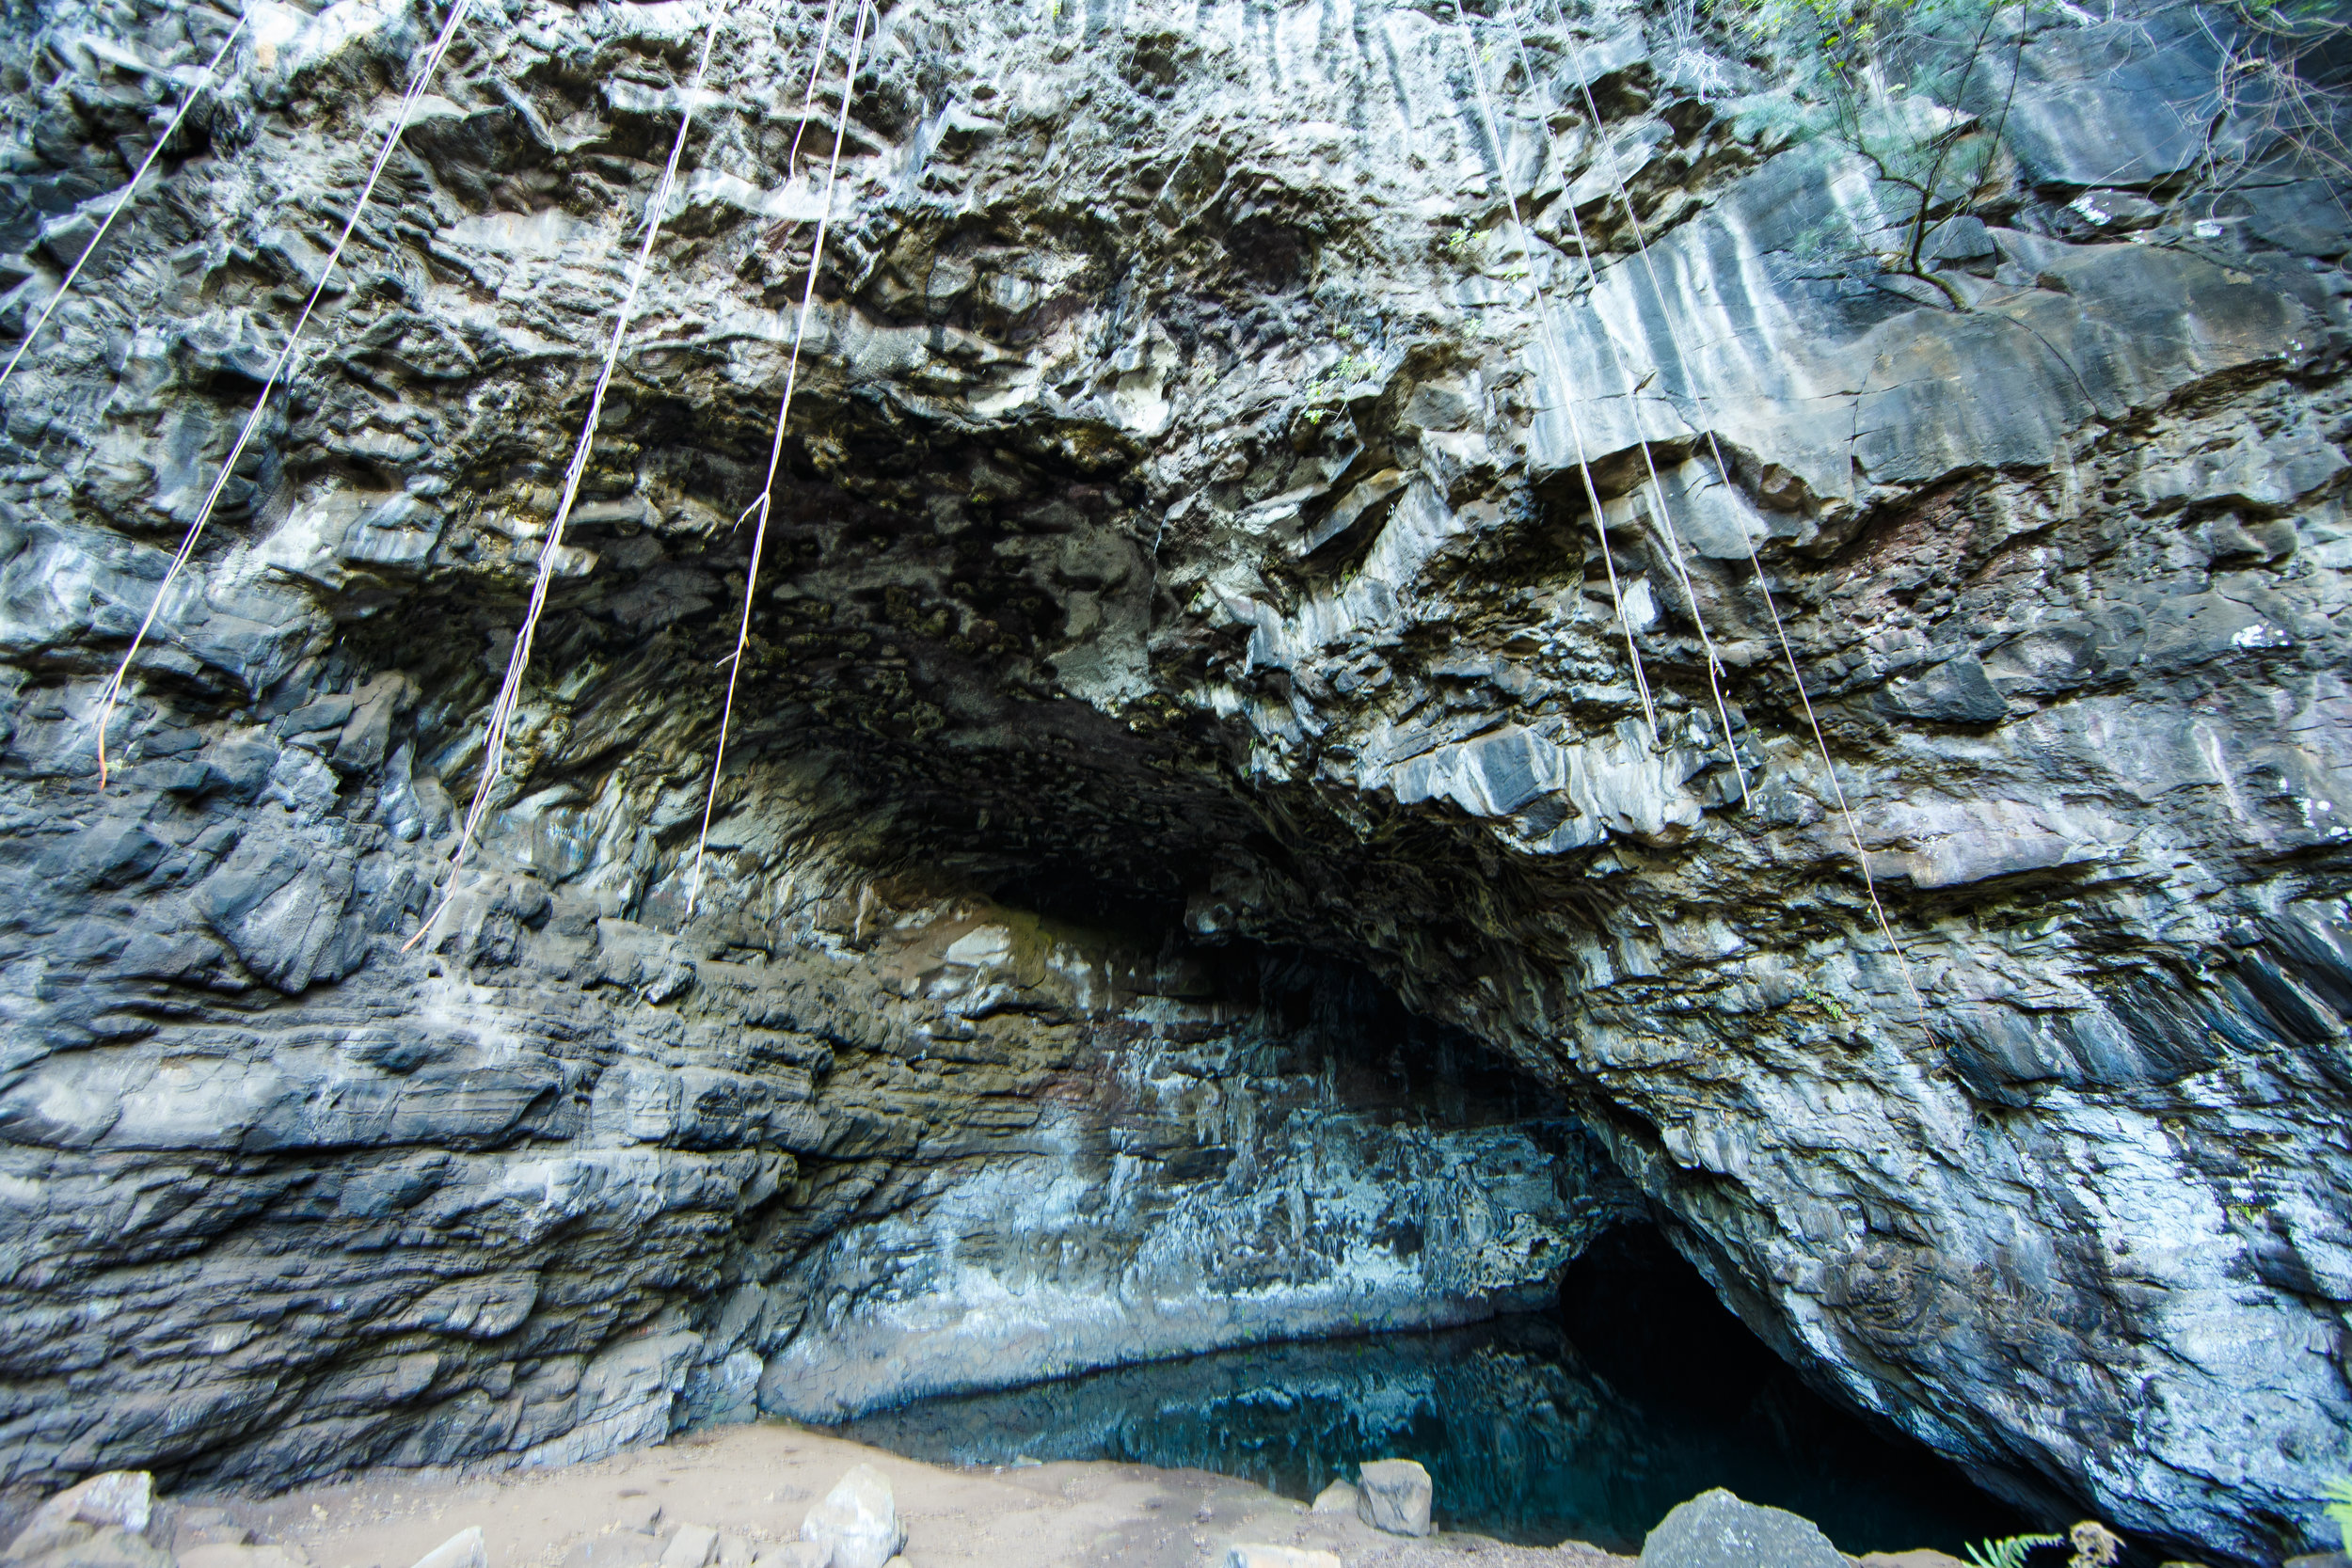  Walking from the car park down to the trailhead, you’ll pass spectacular cave mouths with turquoise water beneath. 